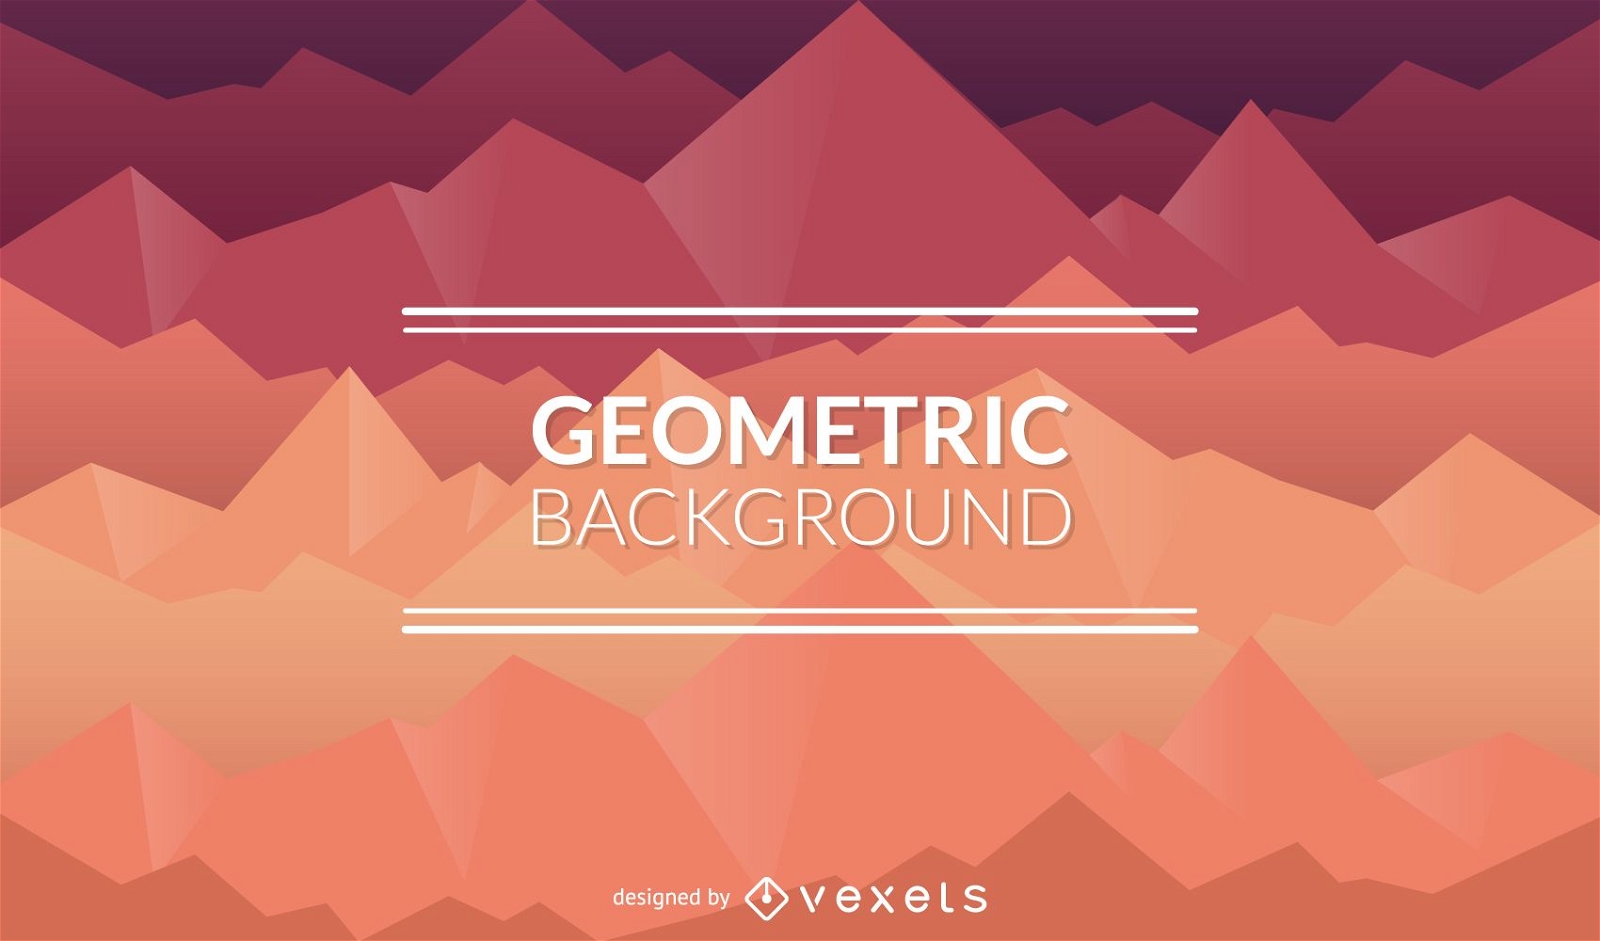 Polygonal background in orange and purple